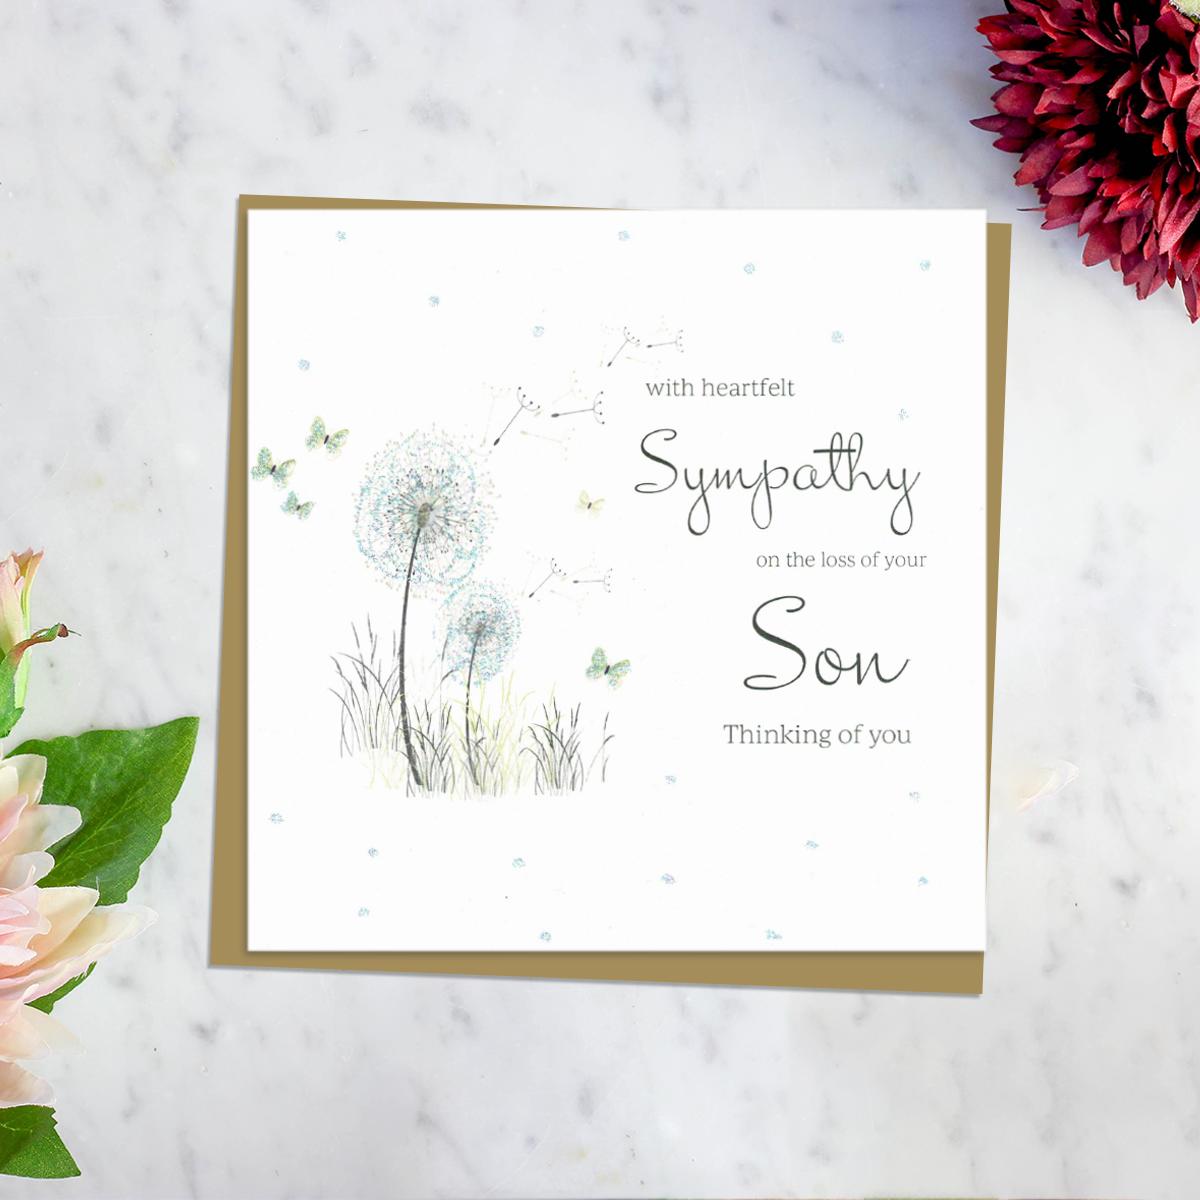 ' With Heartfelt Sympathy On The Loss Of Your Son Thinking Of You' Card Featuring A Dandelion Blowing In The Wind With Surrounding Butterflies. Complete With Brown Envelope And Blank Inside for Own Message